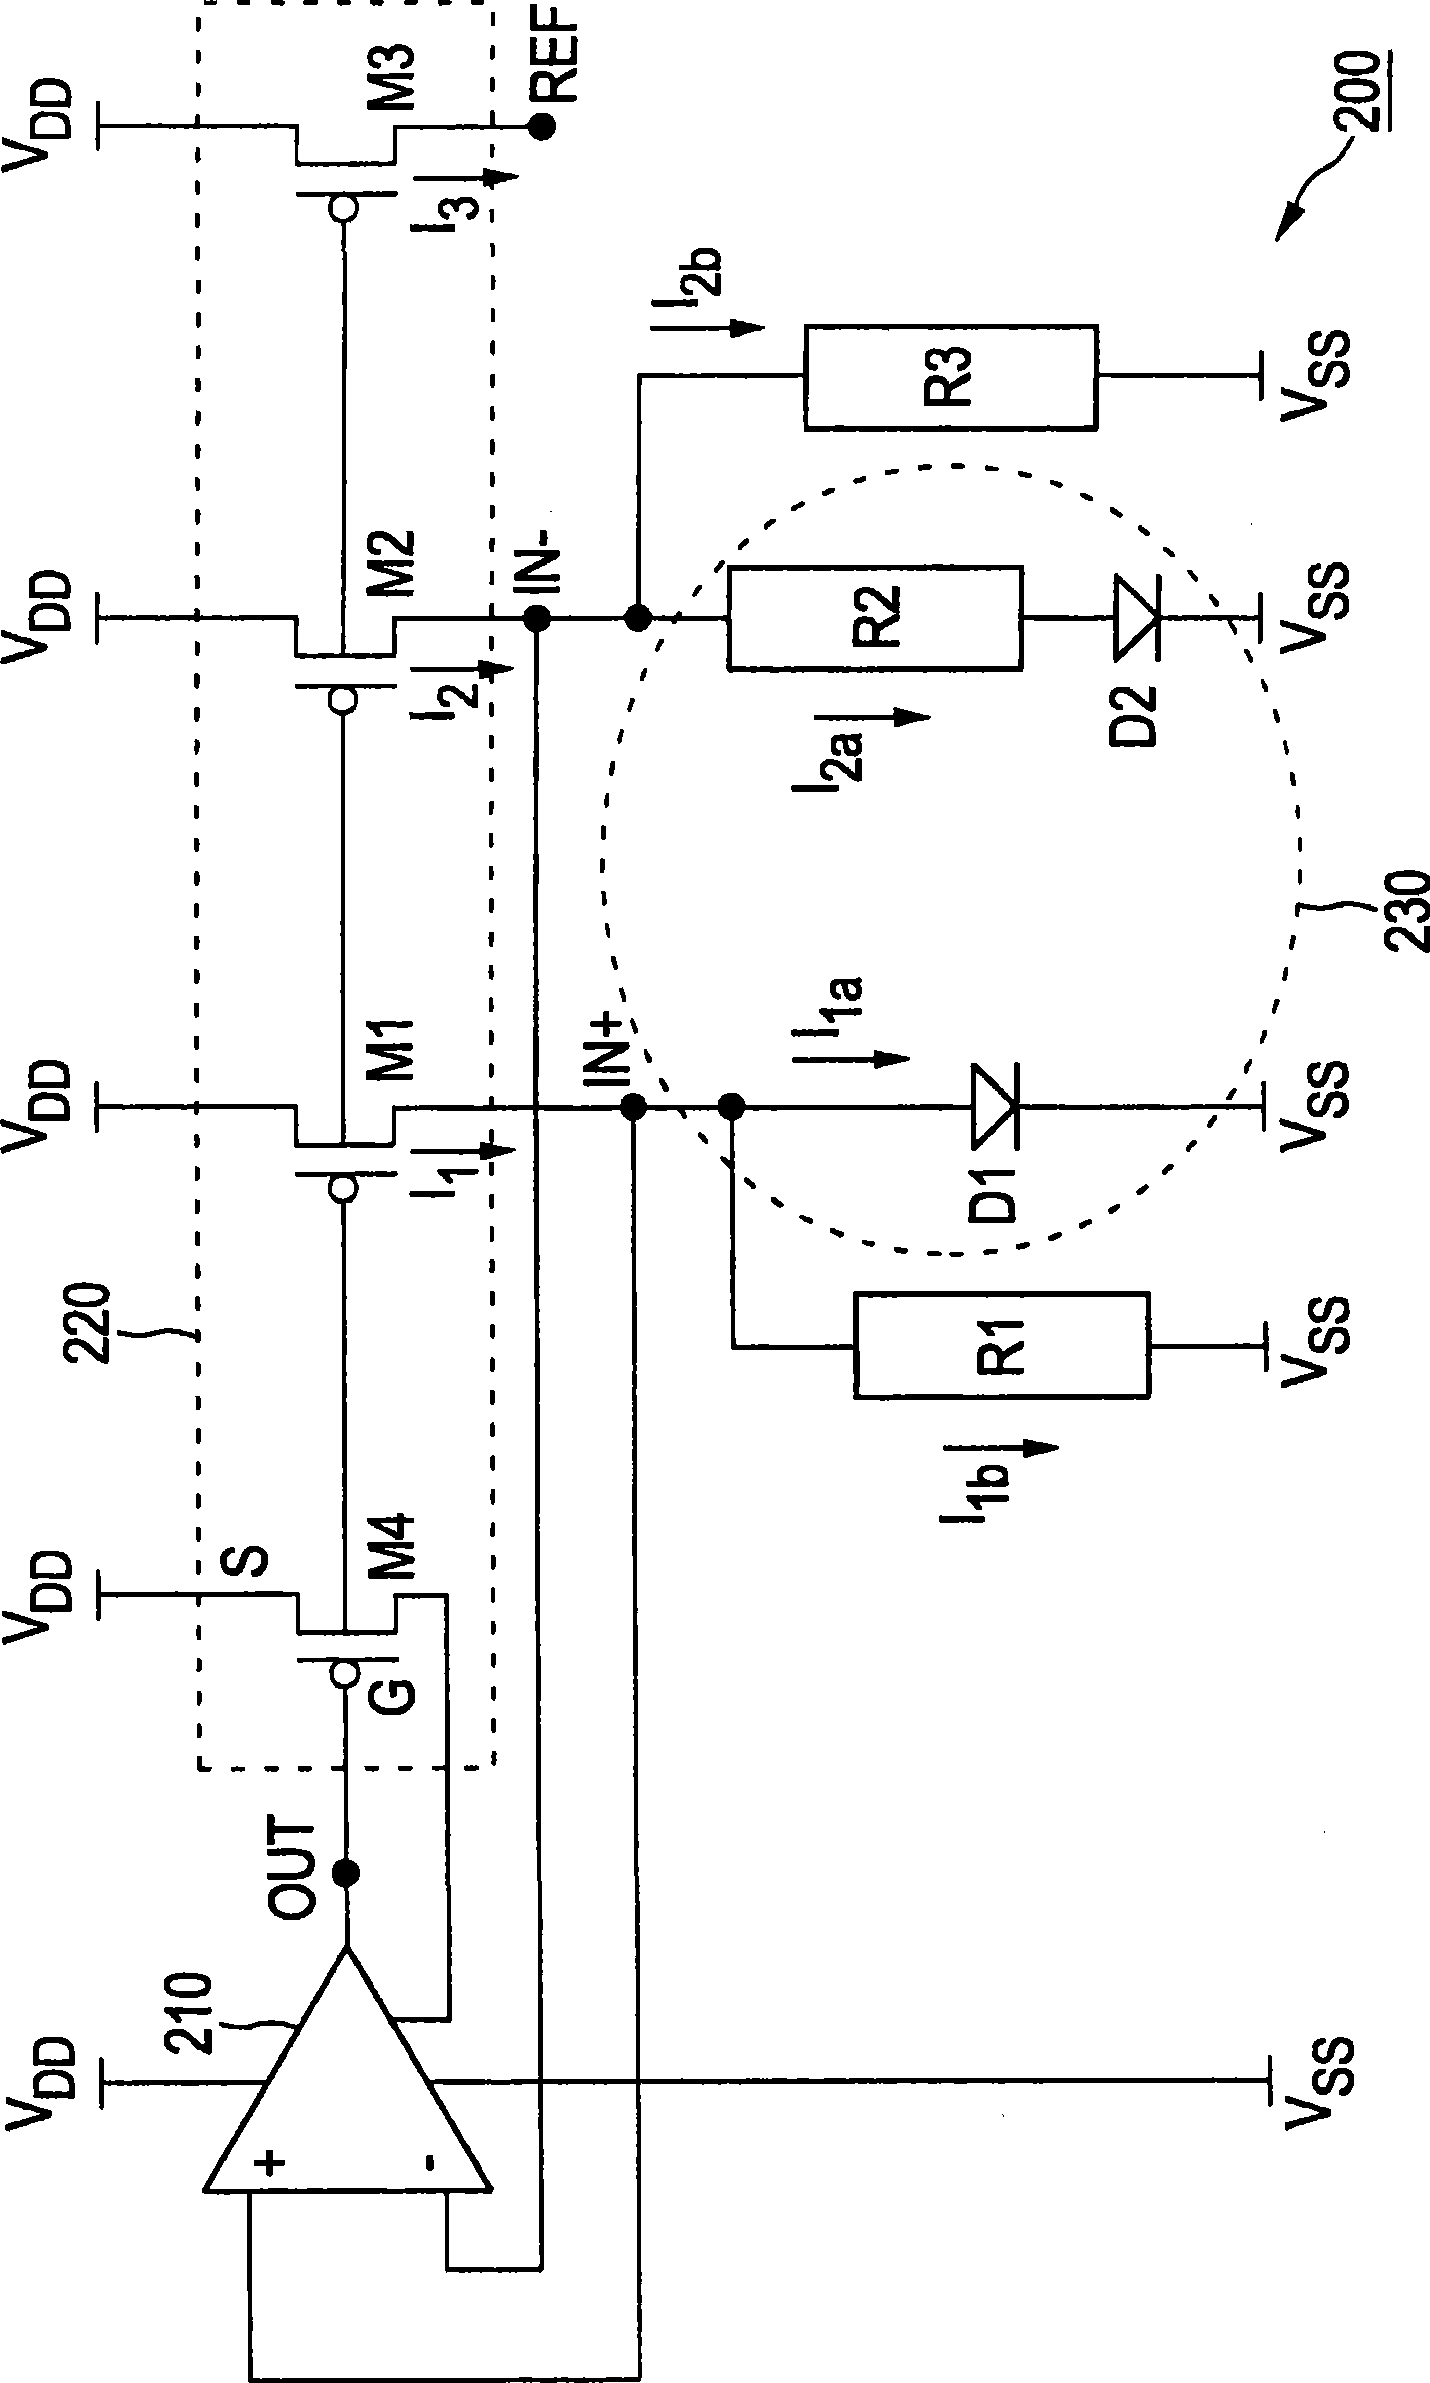 Very low power analog compensation circuit